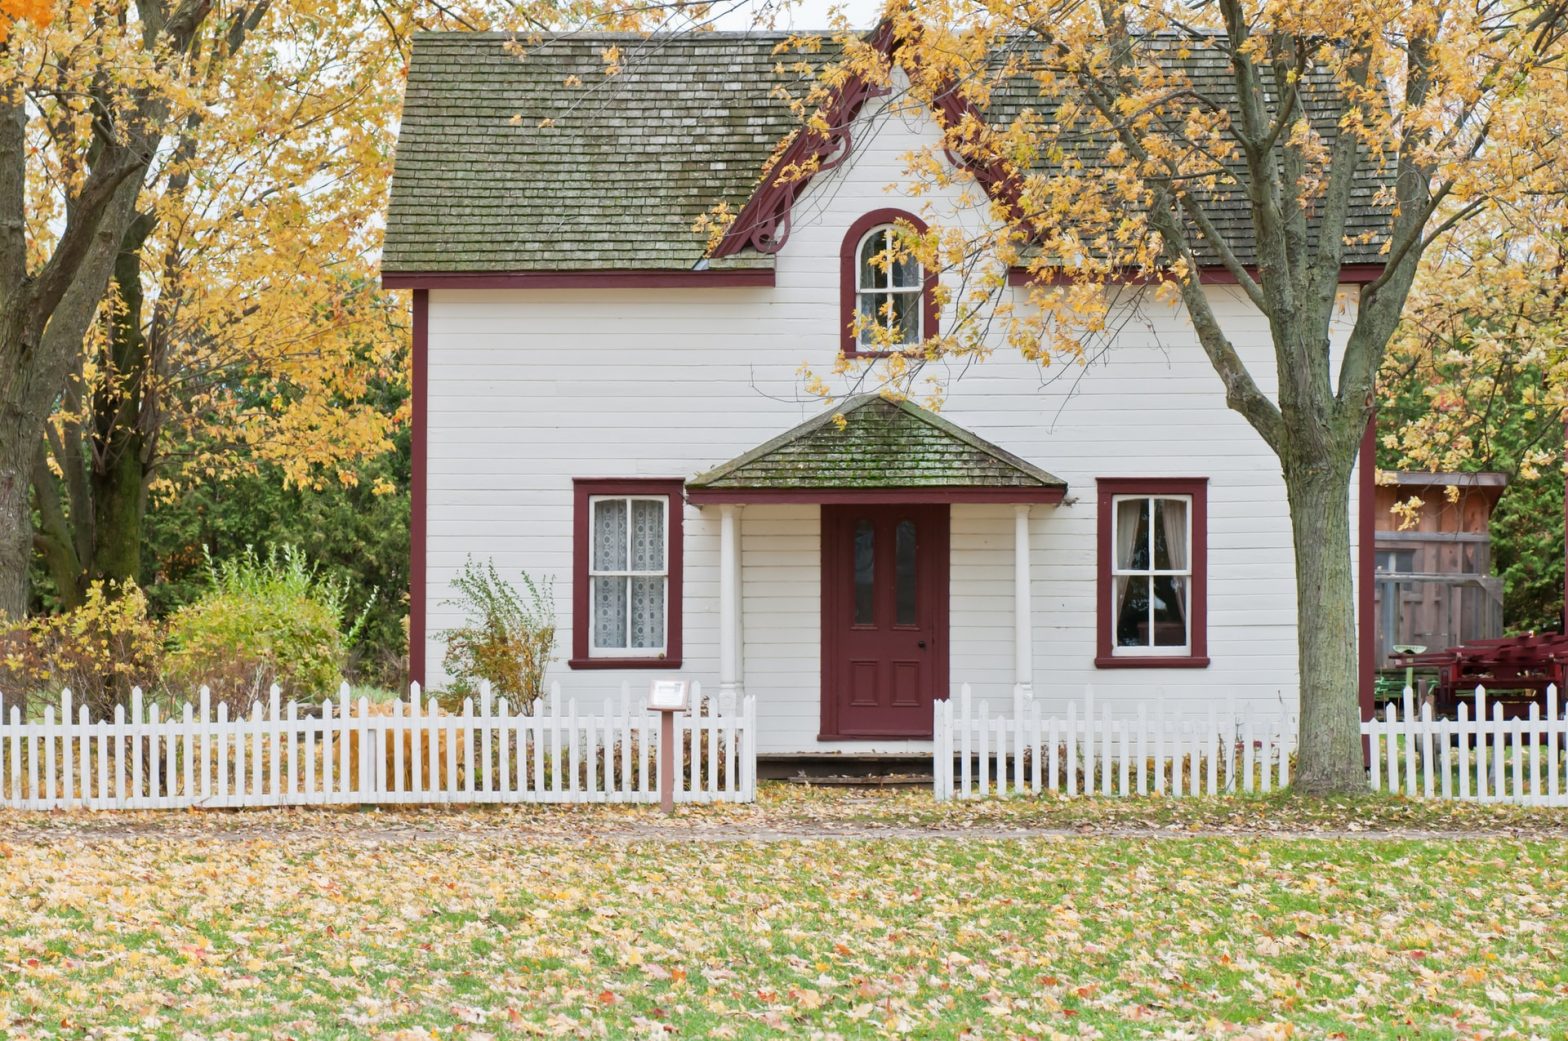 How to Accent Your Home This Autumn: Adding Curb Appeal